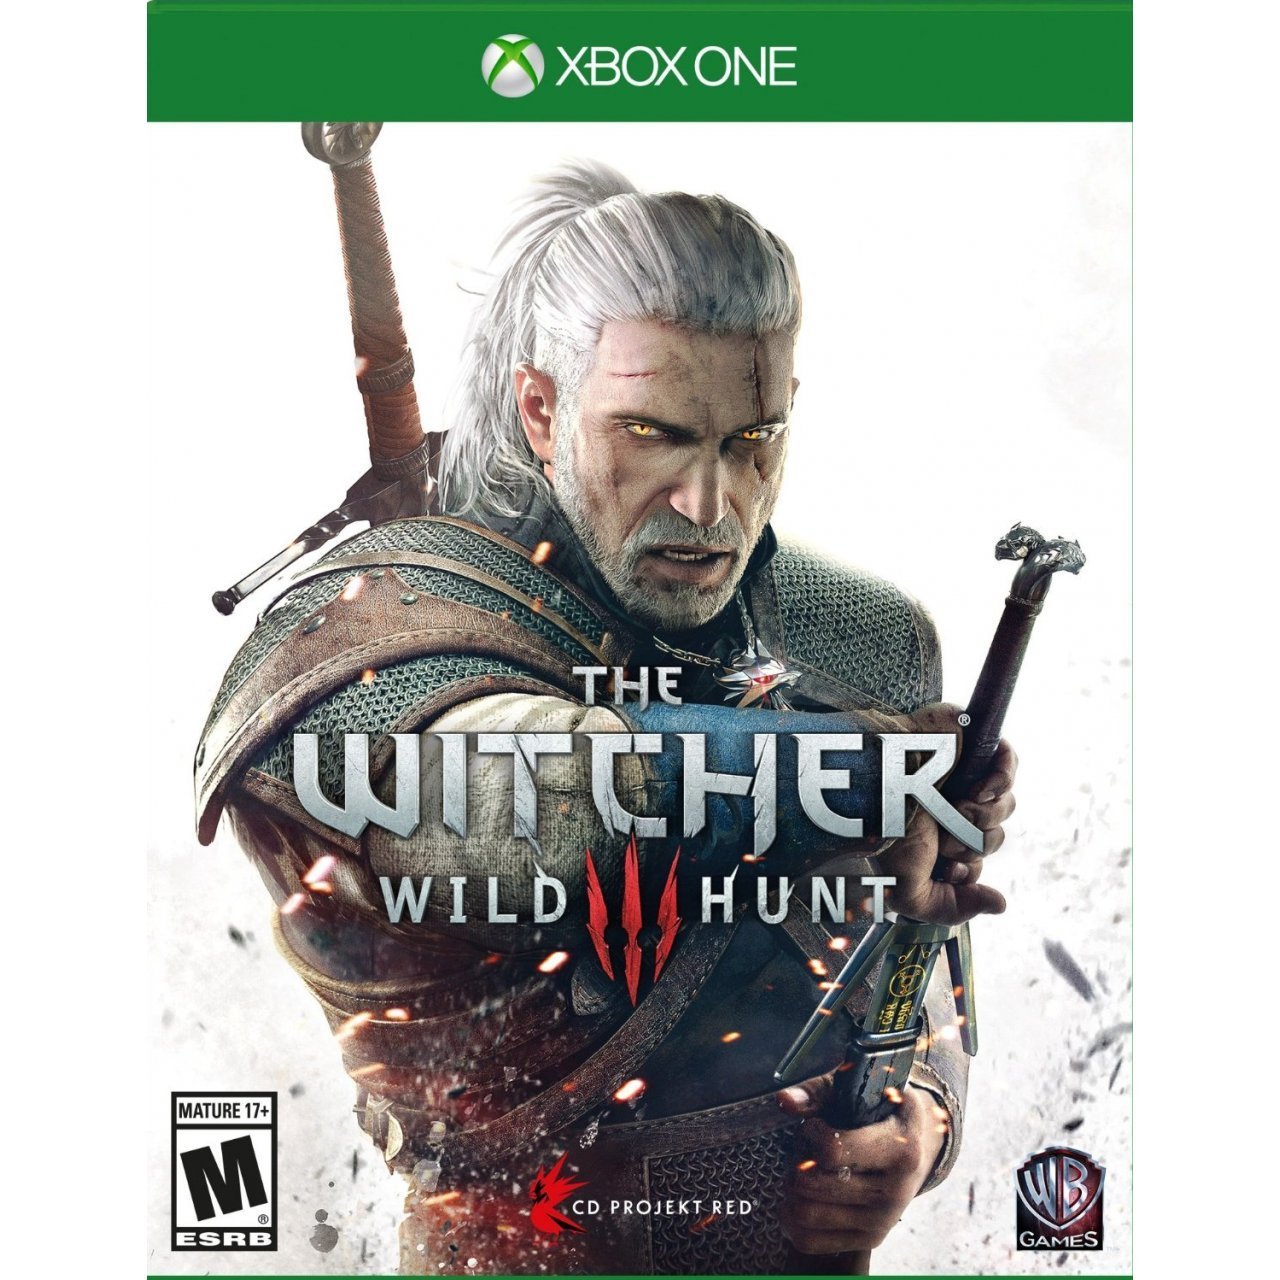 The Witcher 3 Wild Hunt (XBOX ONE) - image 4 of 9